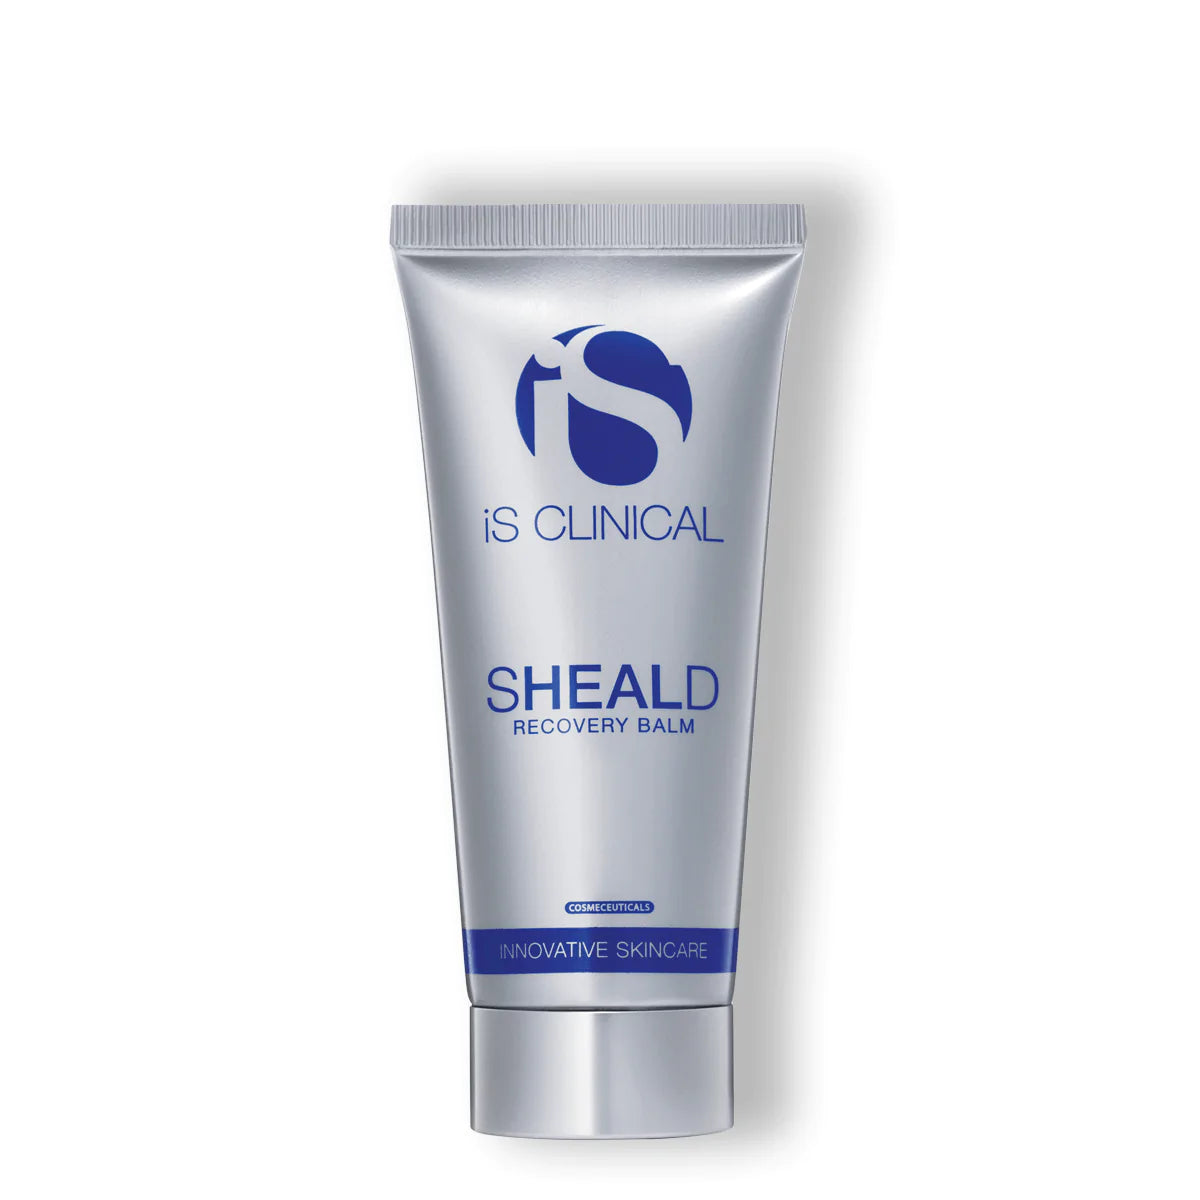 iS Clinical - Sheald Recovery Balm